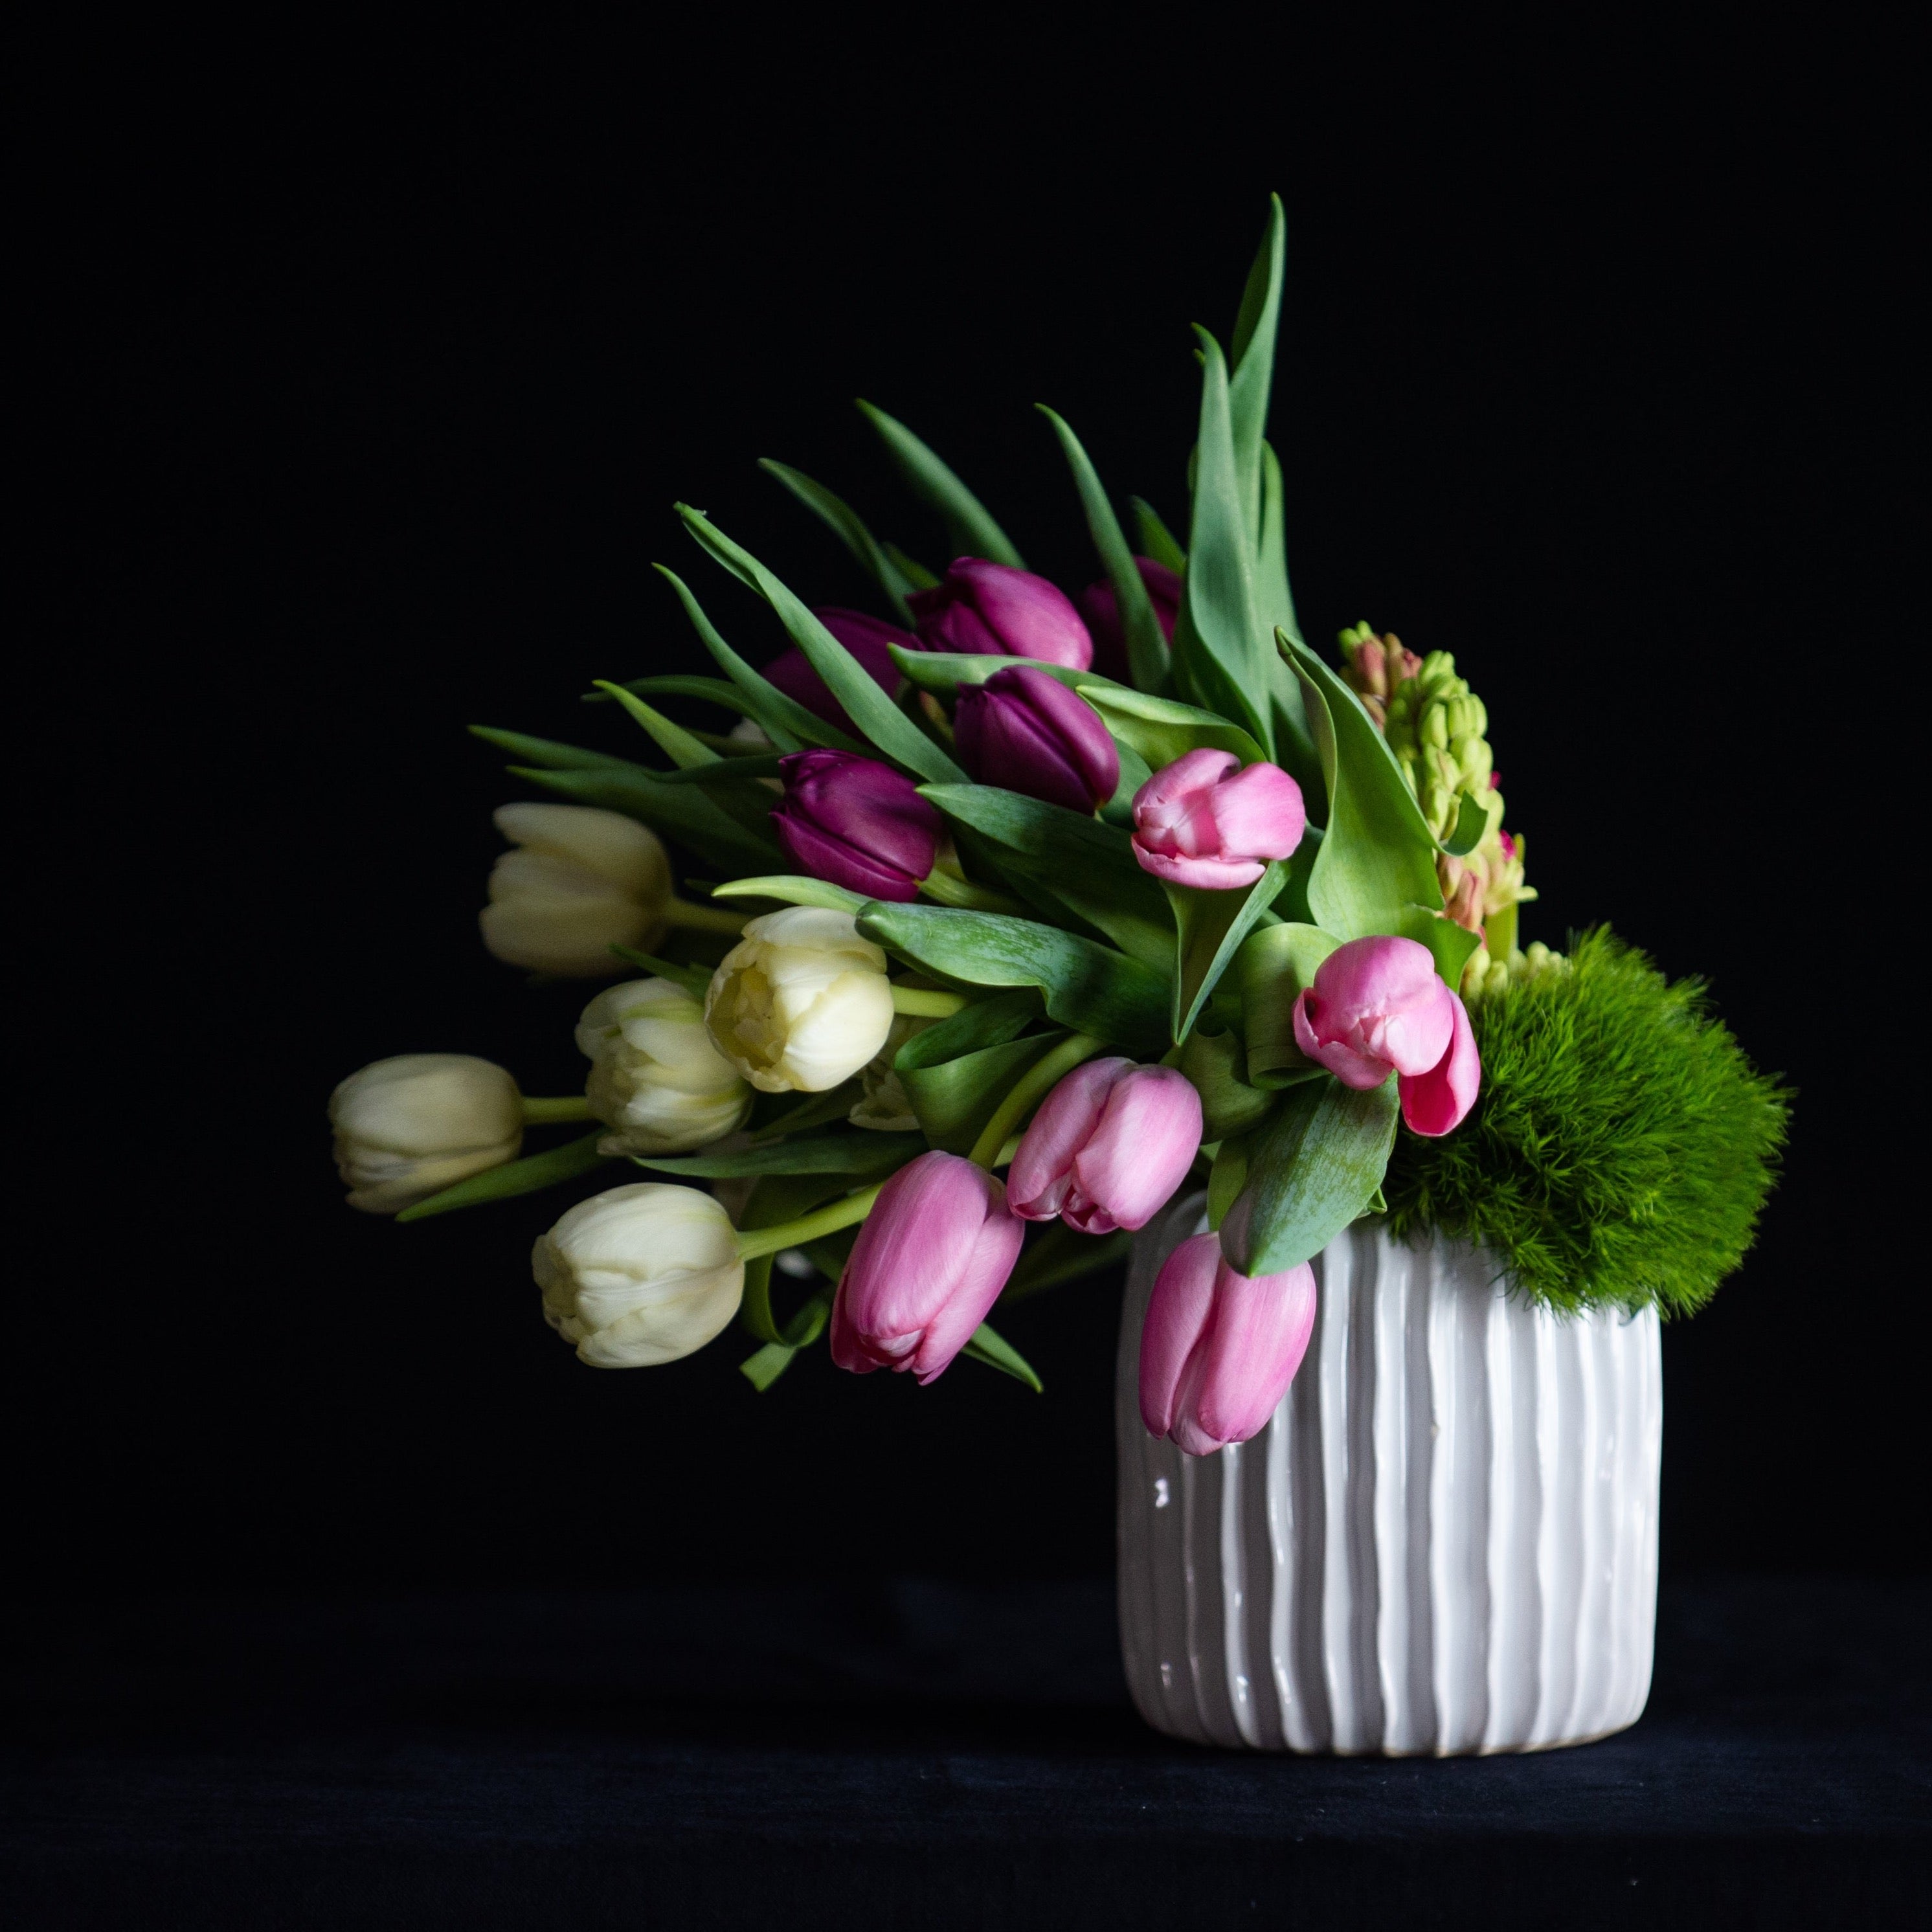 Mother's Day floral arrangement of tulips and hyacinth in pastel colors. In a white ceramic vase